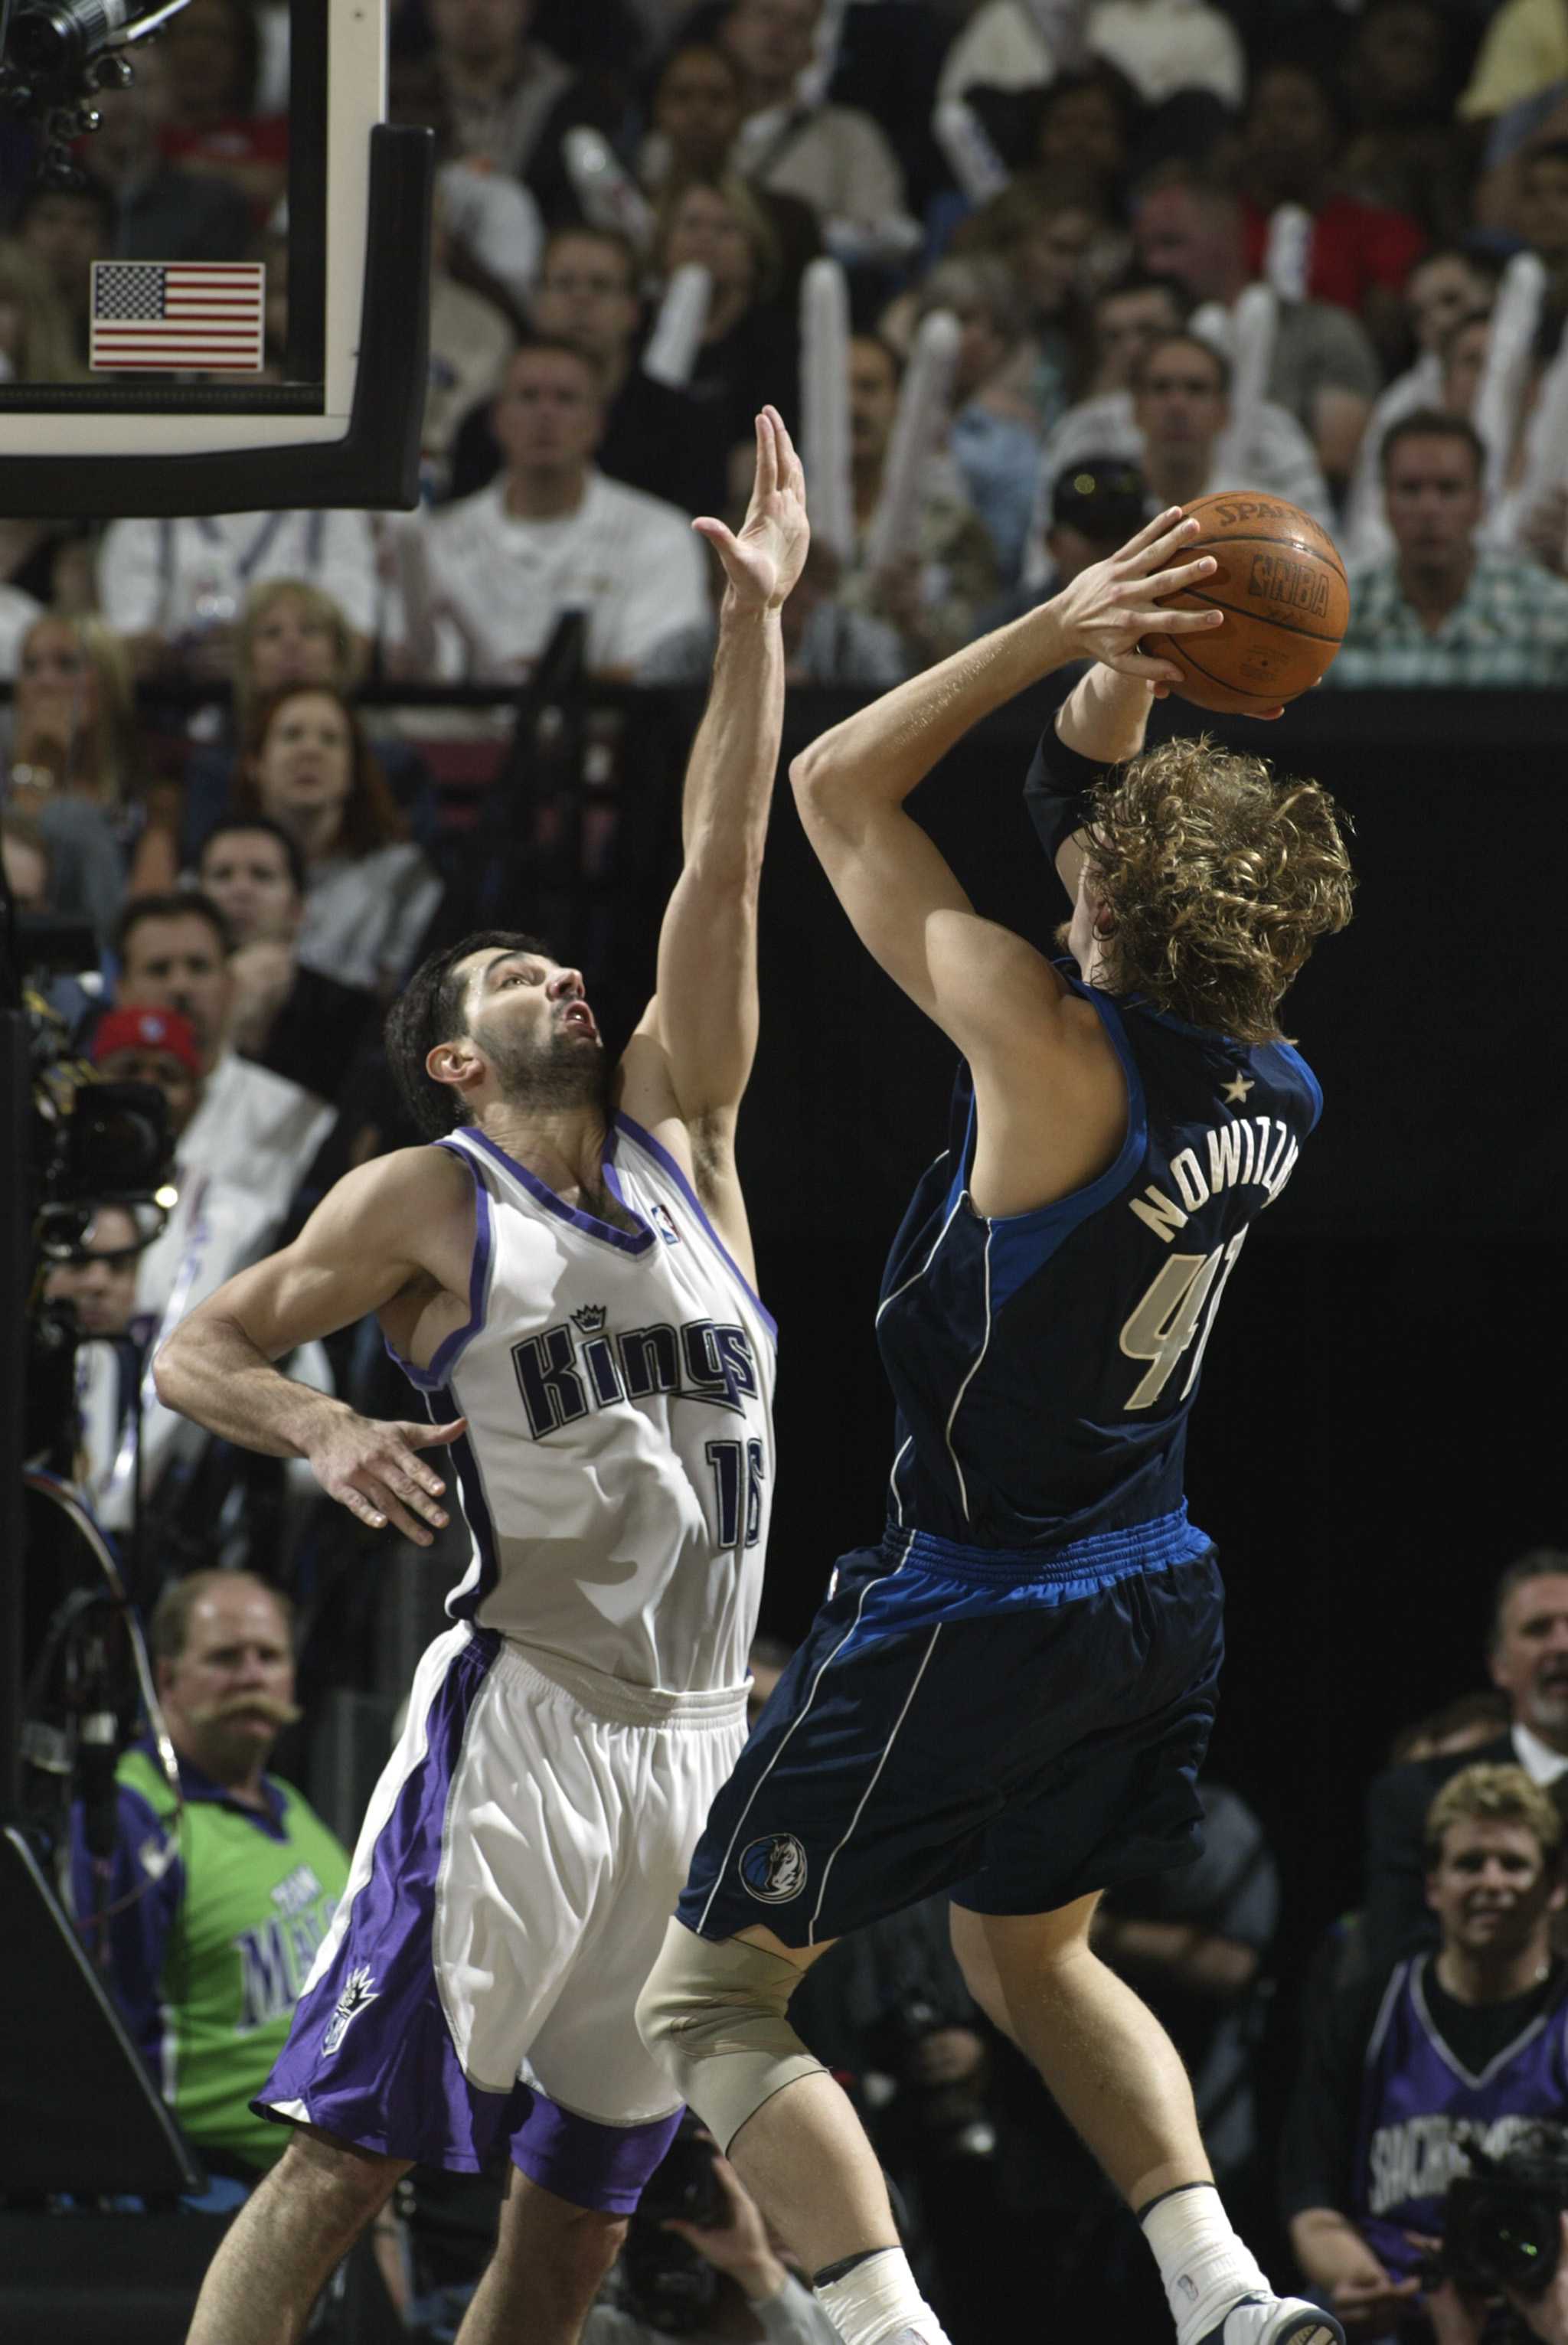 Dirk Nowitzki Shares The Story Of When Peja Stojakovic Beat Him In  Best-Of-100 Three-Point Contest: “I Think He Made 95 Or 96 Of Them. The  Whole Gym Was Stunned. - Fadeaway World